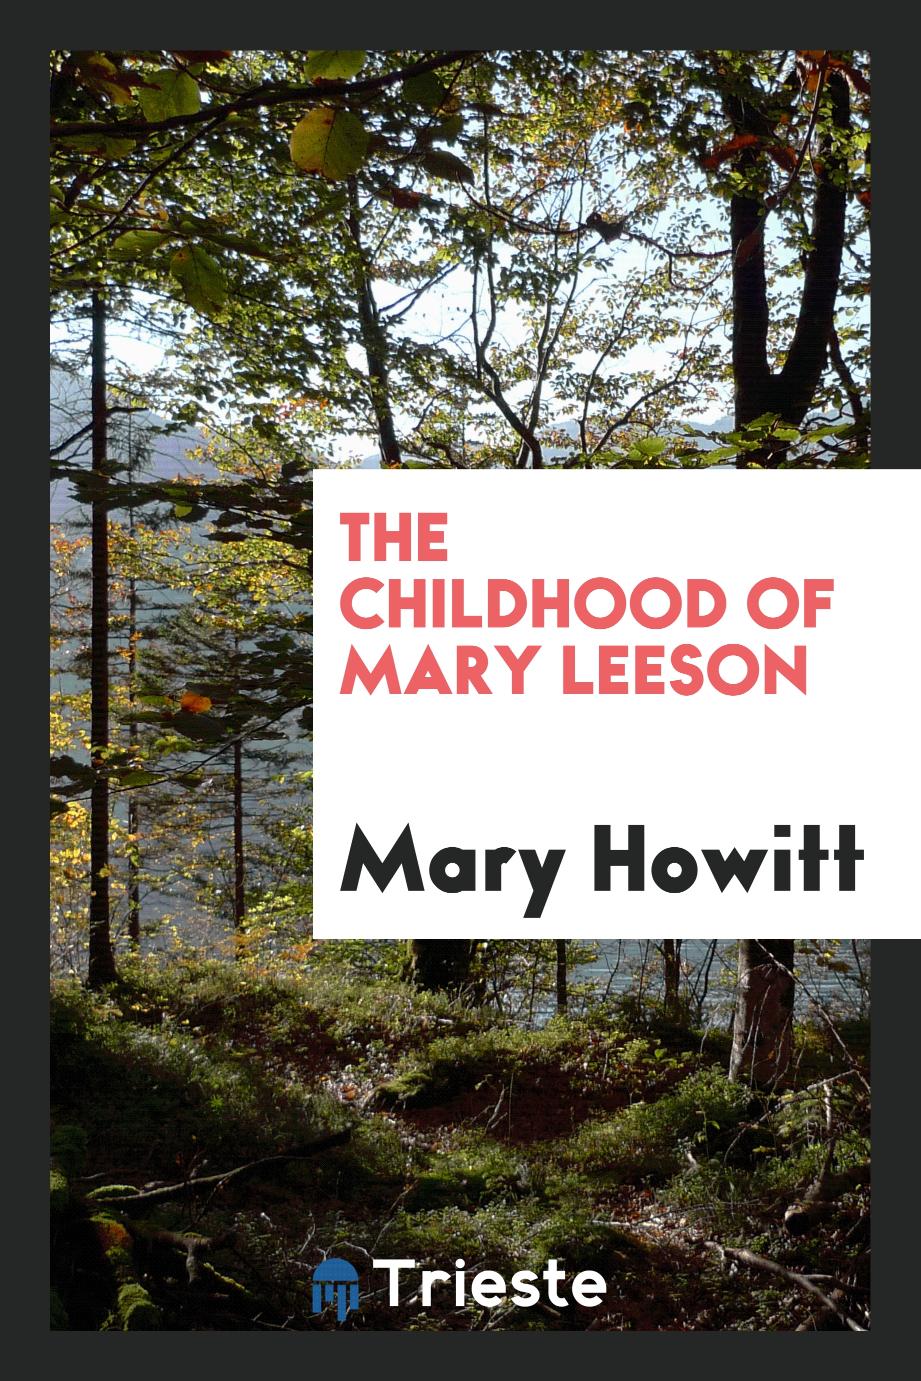 The Childhood of Mary Leeson